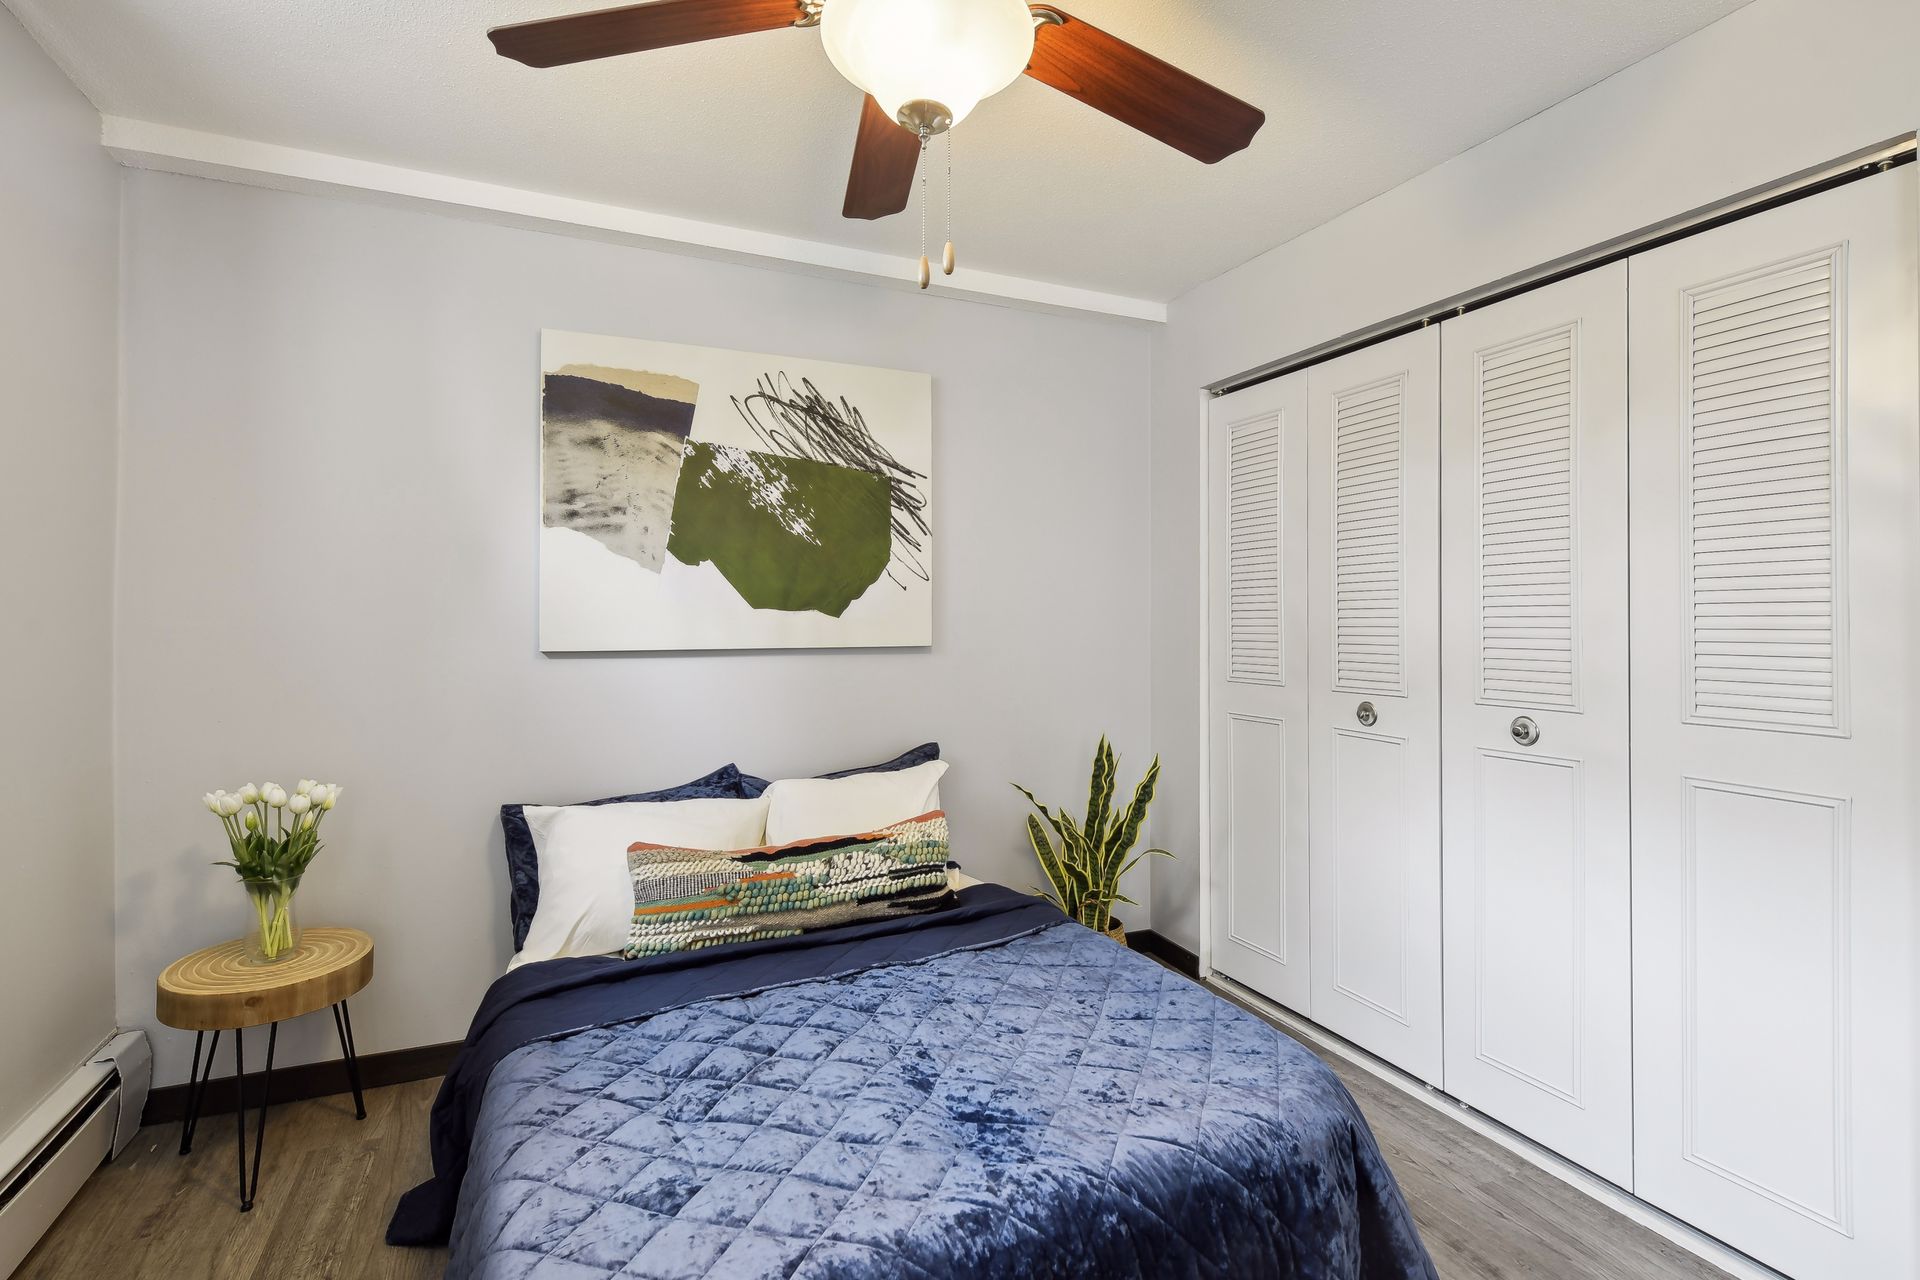 Furnished bedroom with a ceiling fan